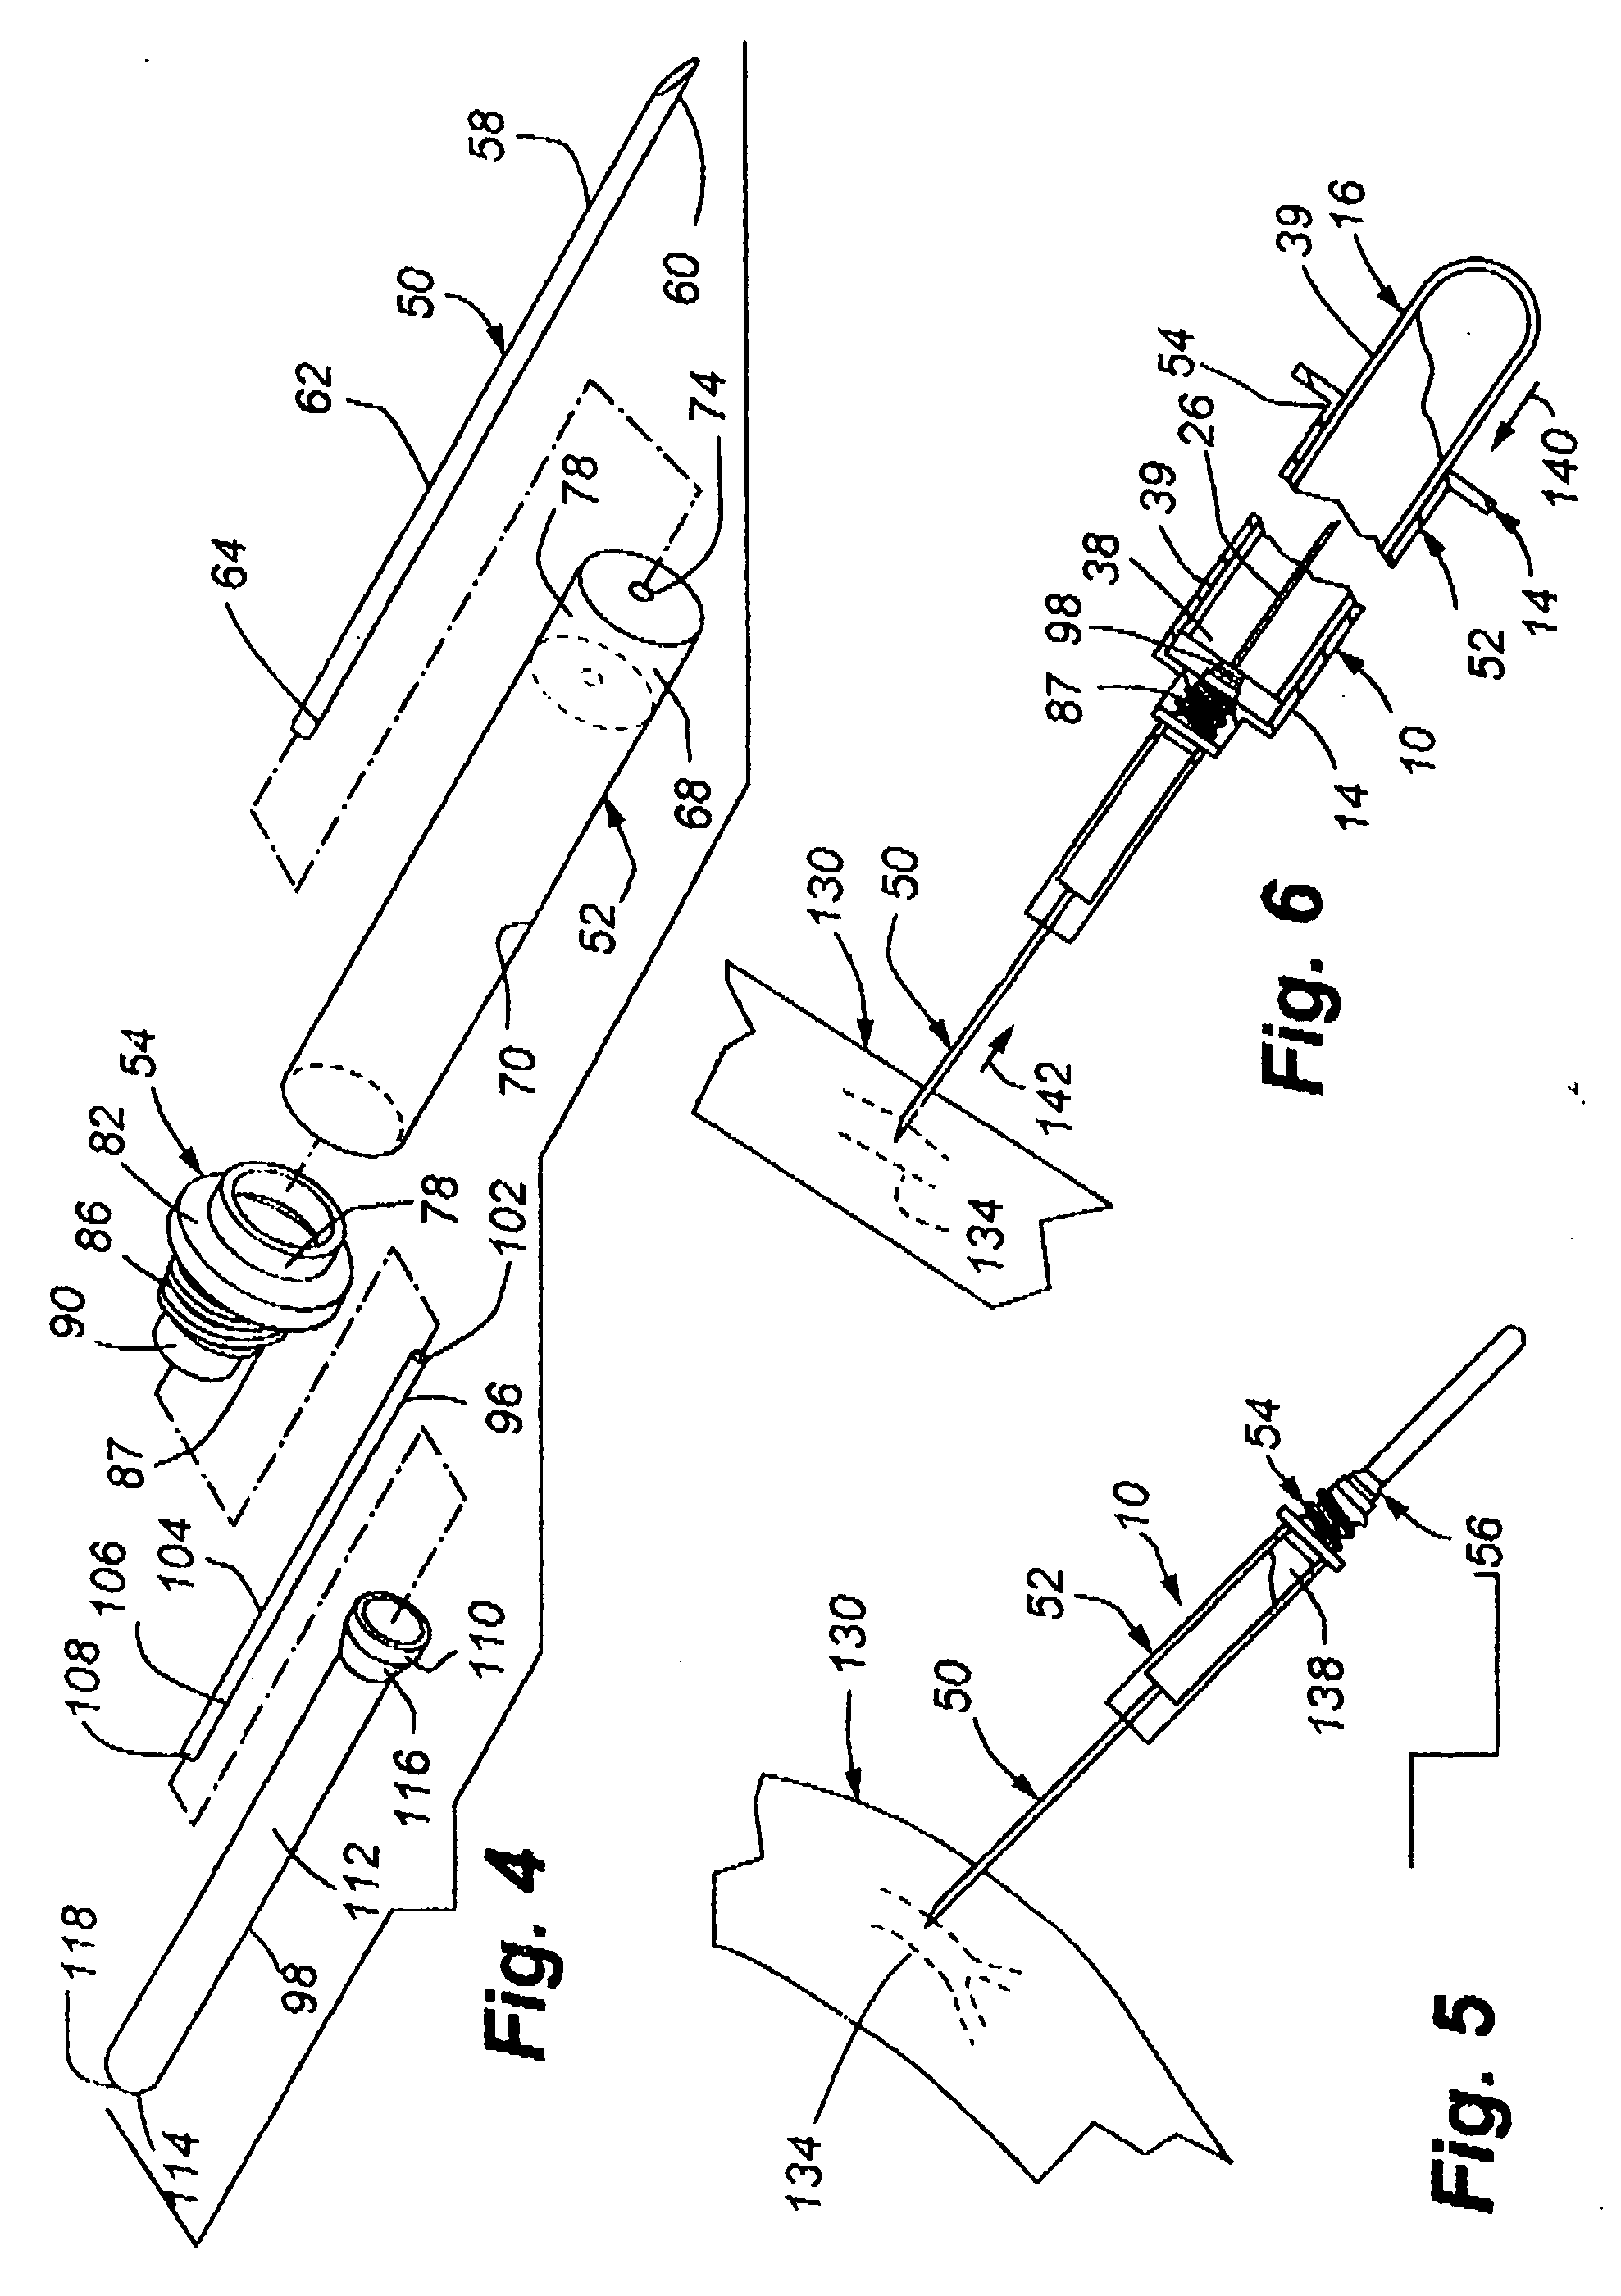 Fluid detection needle assembly